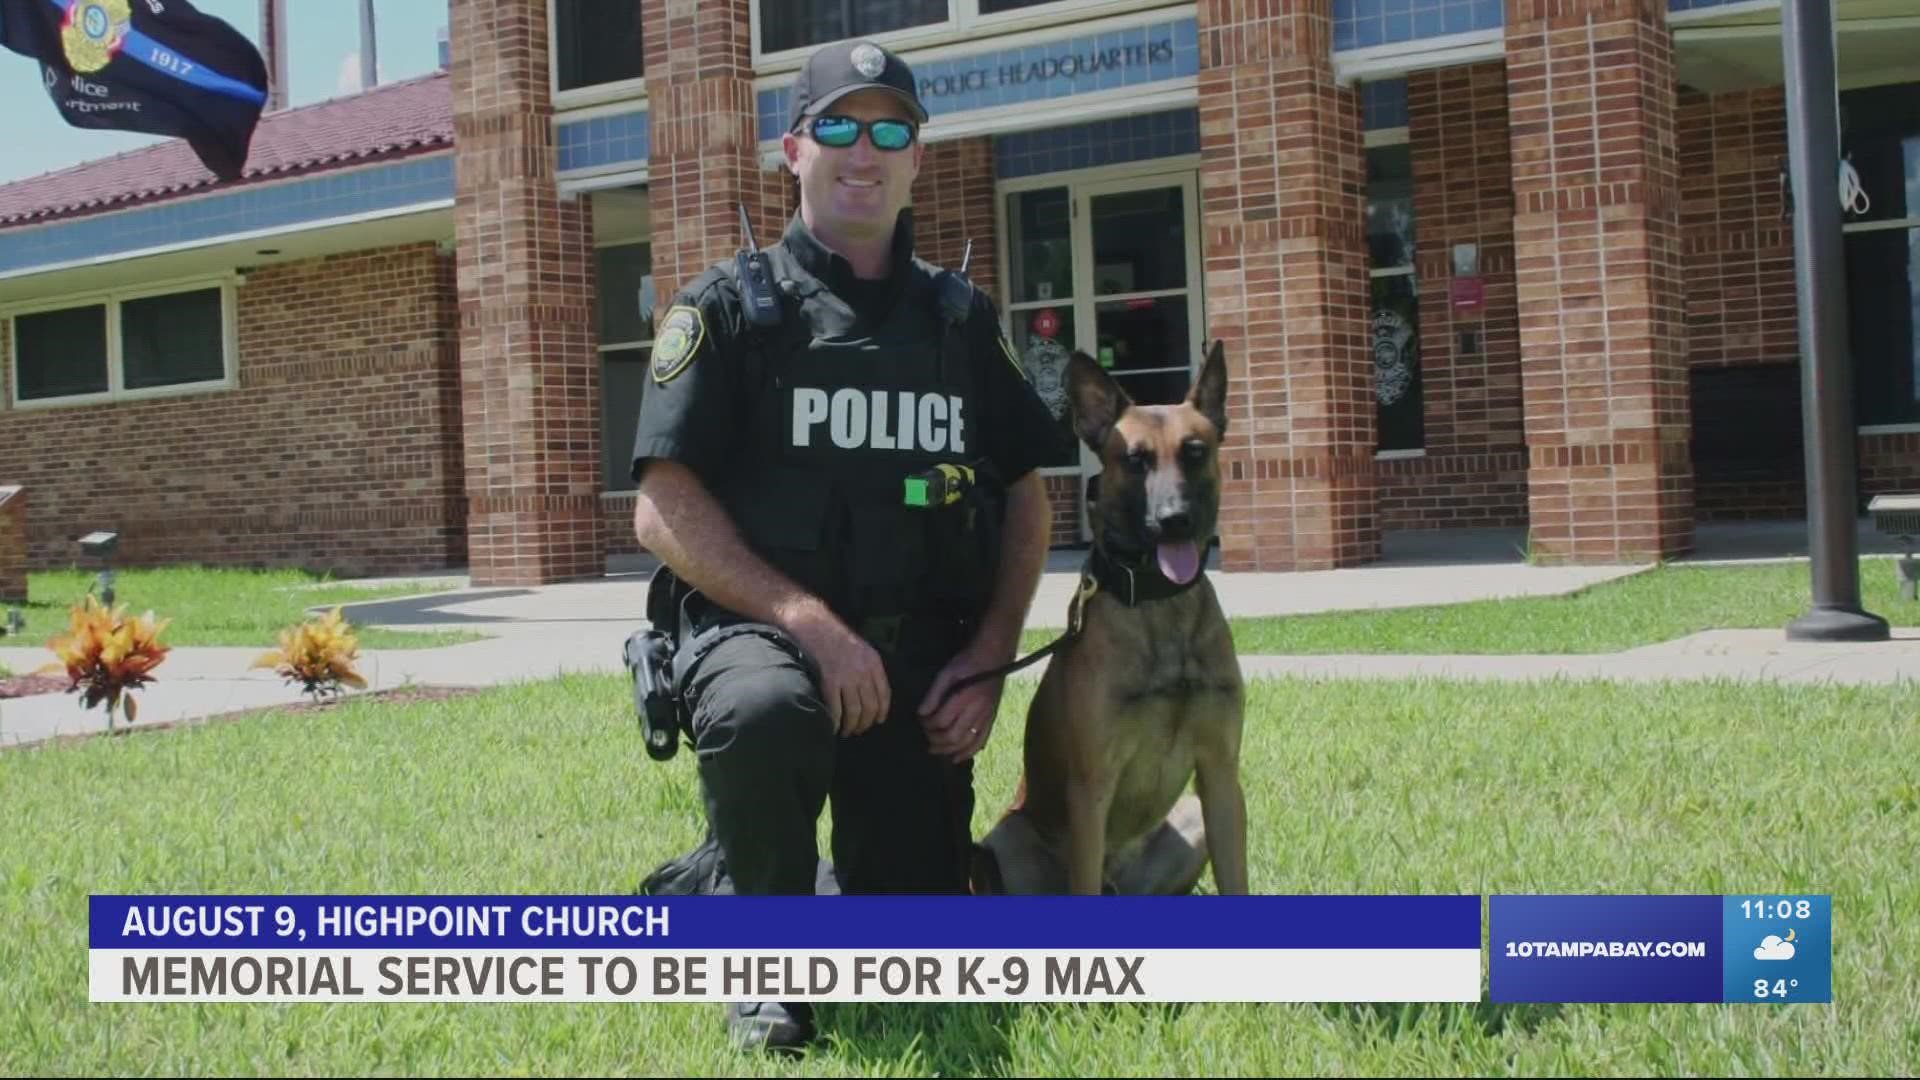 The police dog was described as "fearless."